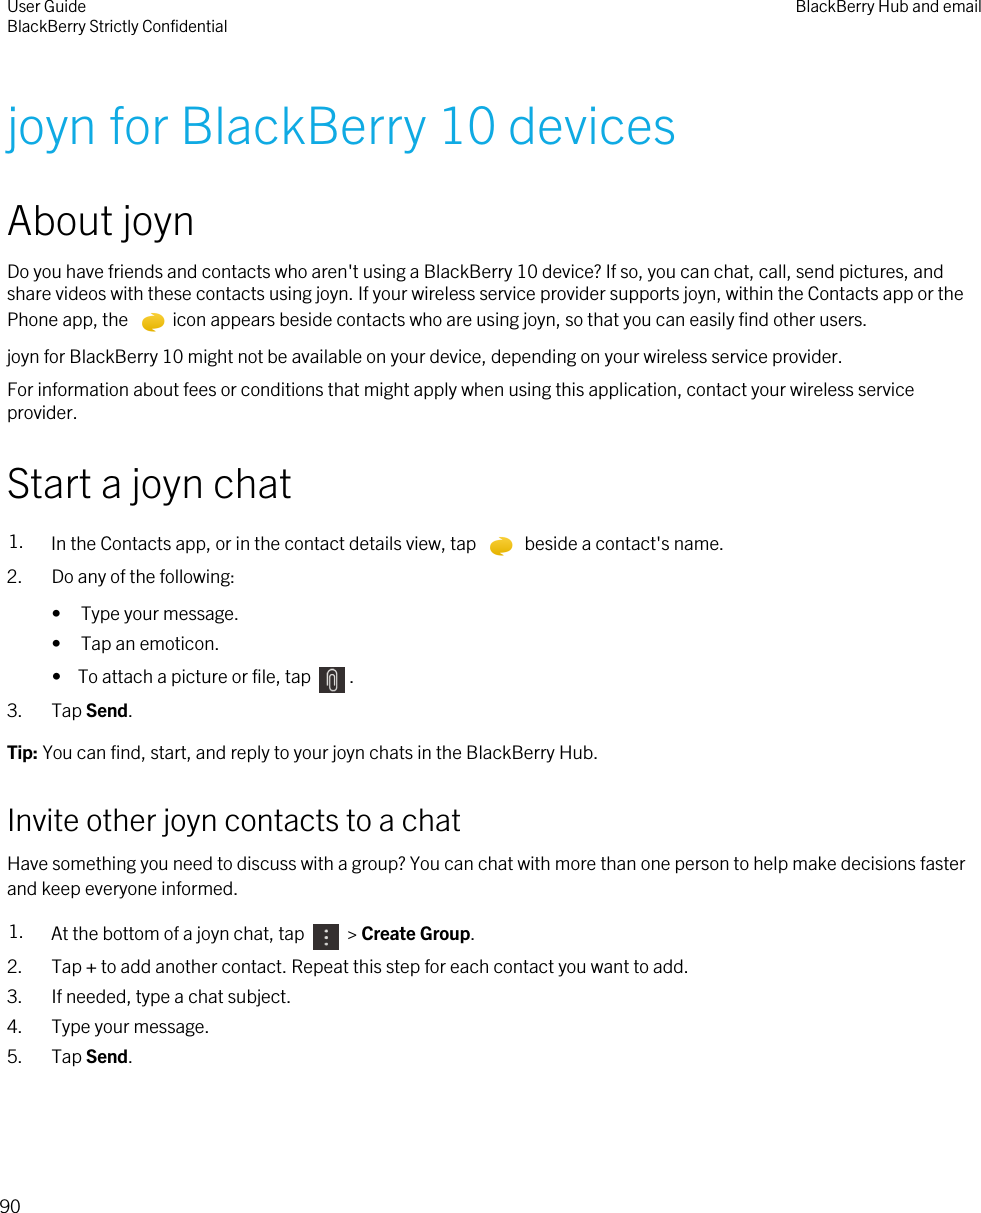 joyn for BlackBerry 10 devicesAbout joynDo you have friends and contacts who aren&apos;t using a BlackBerry 10 device? If so, you can chat, call, send pictures, and share videos with these contacts using joyn. If your wireless service provider supports joyn, within the Contacts app or the Phone app, the  icon appears beside contacts who are using joyn, so that you can easily find other users.joyn for BlackBerry 10 might not be available on your device, depending on your wireless service provider.For information about fees or conditions that might apply when using this application, contact your wireless service provider.Start a joyn chat1. In the Contacts app, or in the contact details view, tap   beside a contact&apos;s name. 2. Do any of the following:• Type your message.• Tap an emoticon.•  To attach a picture or file, tap  .3. Tap Send.Tip: You can find, start, and reply to your joyn chats in the BlackBerry Hub.Invite other joyn contacts to a chatHave something you need to discuss with a group? You can chat with more than one person to help make decisions faster and keep everyone informed.1. At the bottom of a joyn chat, tap   &gt; Create Group.2. Tap + to add another contact. Repeat this step for each contact you want to add.3. If needed, type a chat subject.4. Type your message.5. Tap Send.User GuideBlackBerry Strictly Confidential BlackBerry Hub and email90